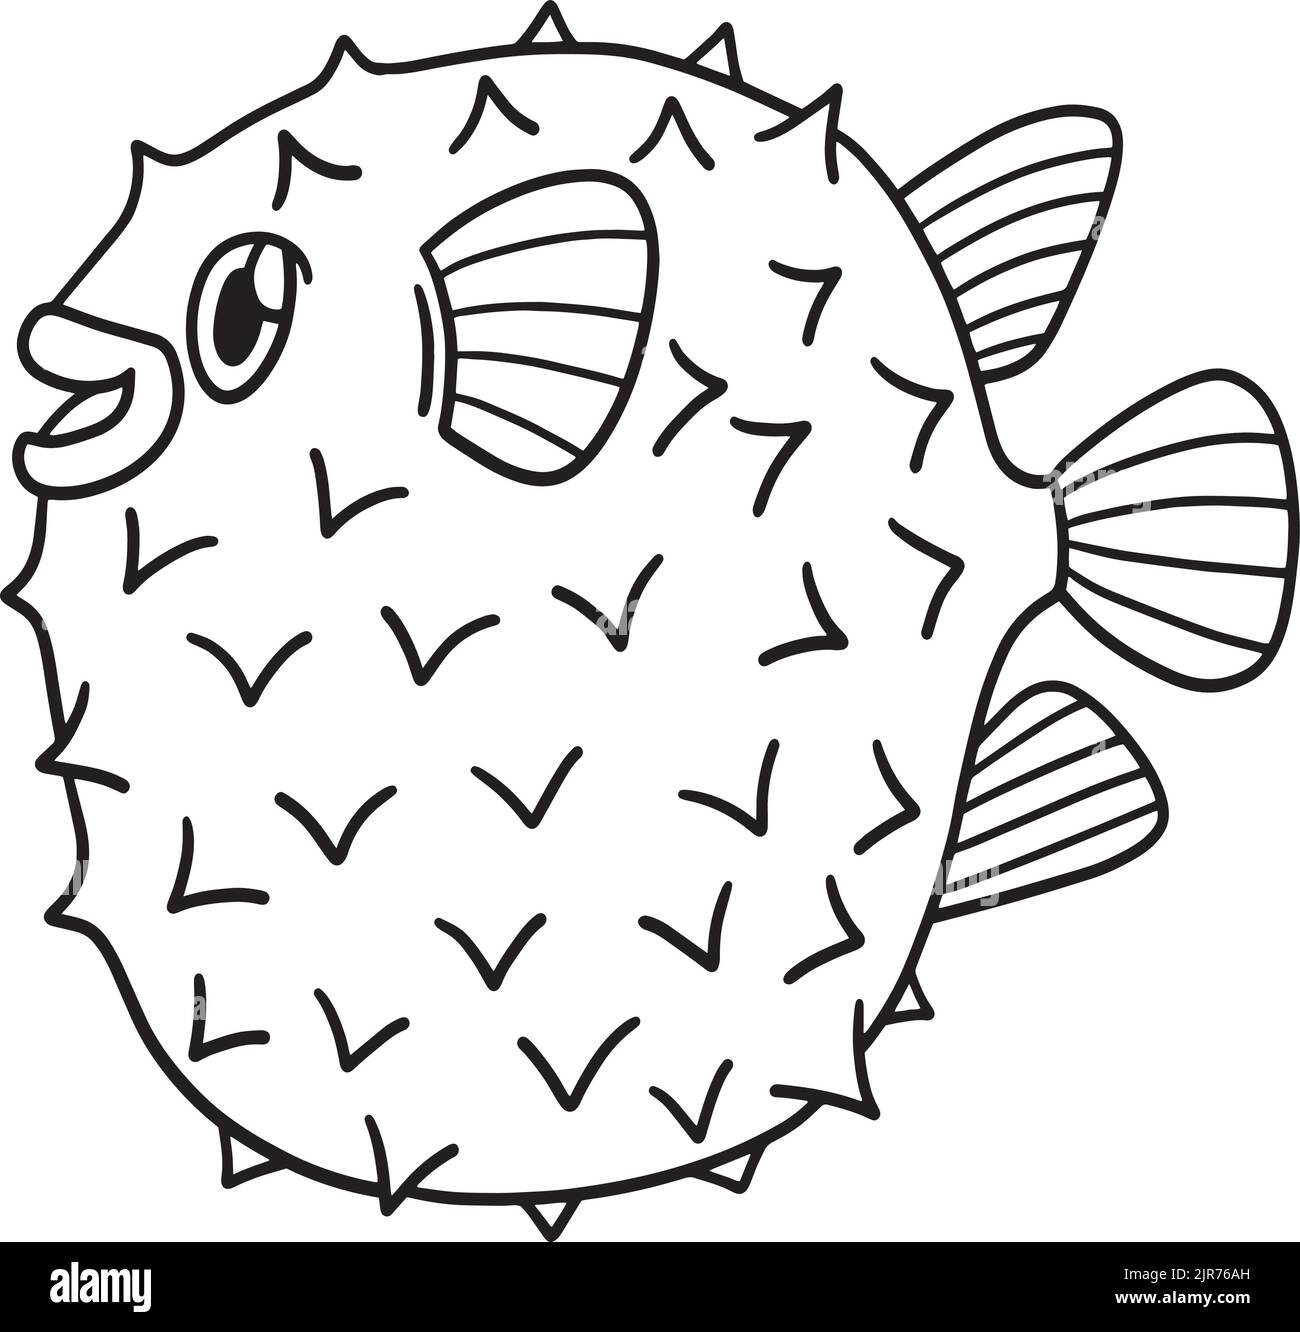 Pufferfish Isolated Coloring Page for Kids Stock Vector